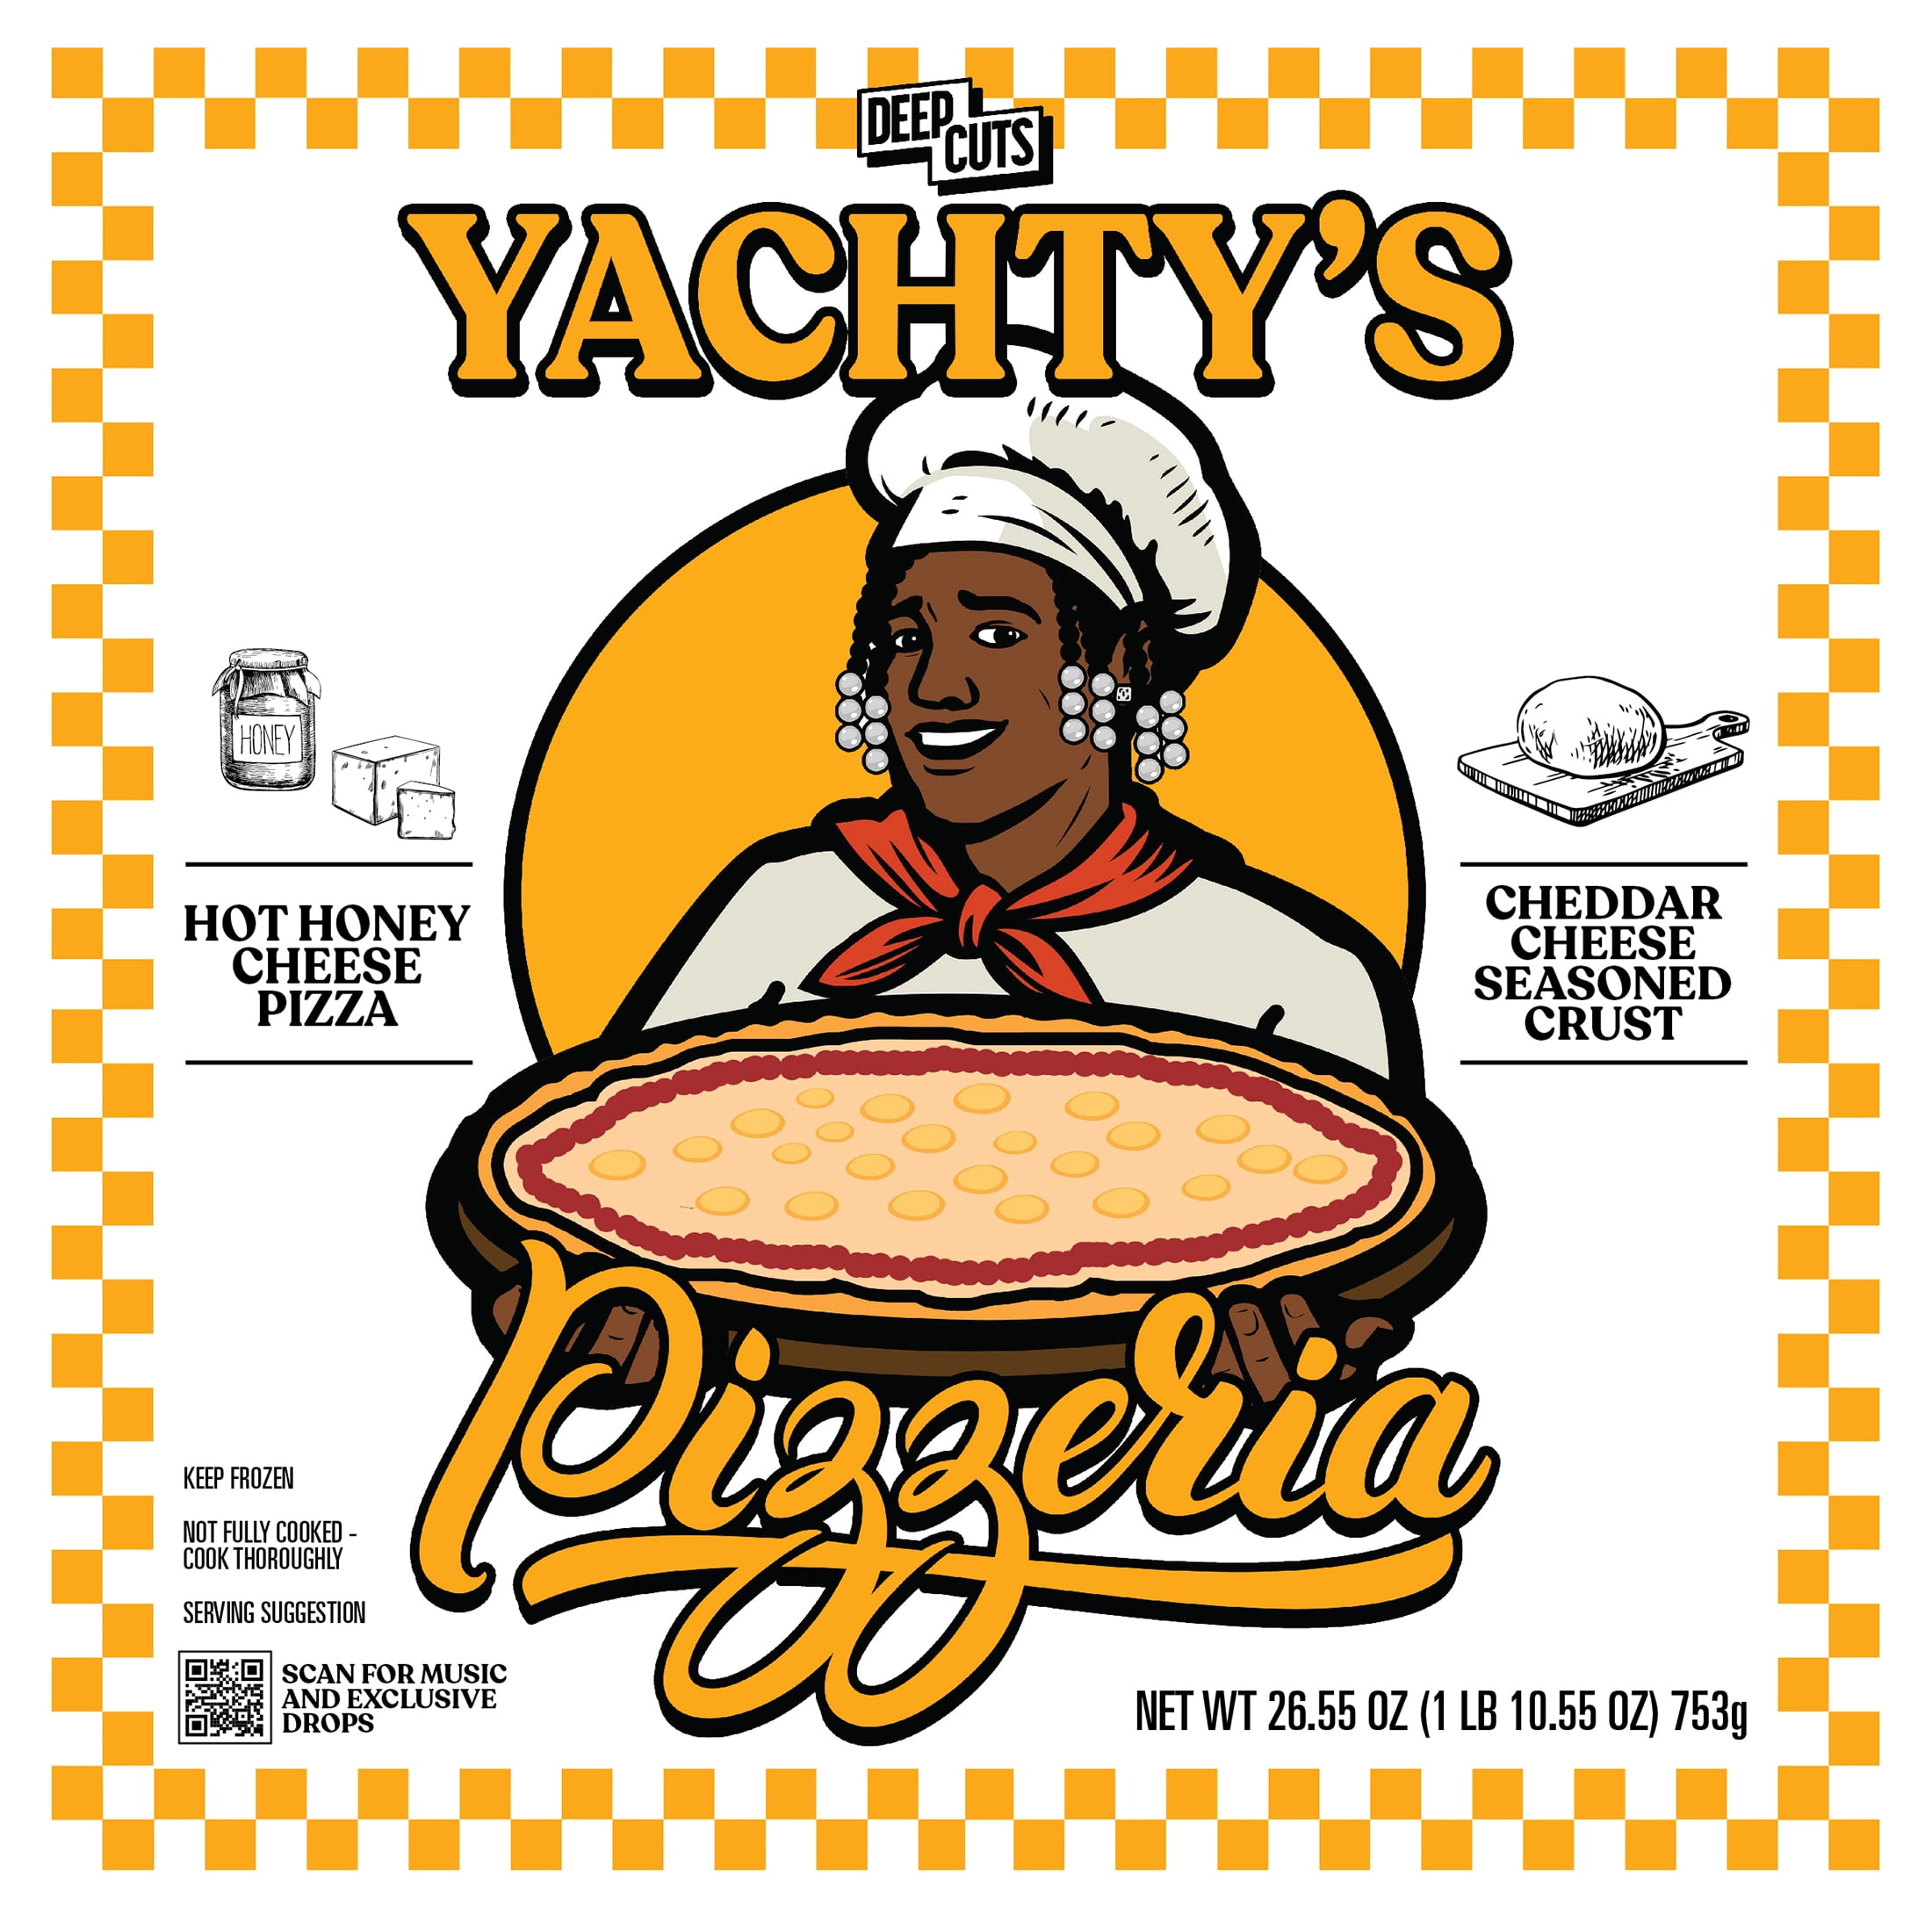 yachty's pizza where to buy